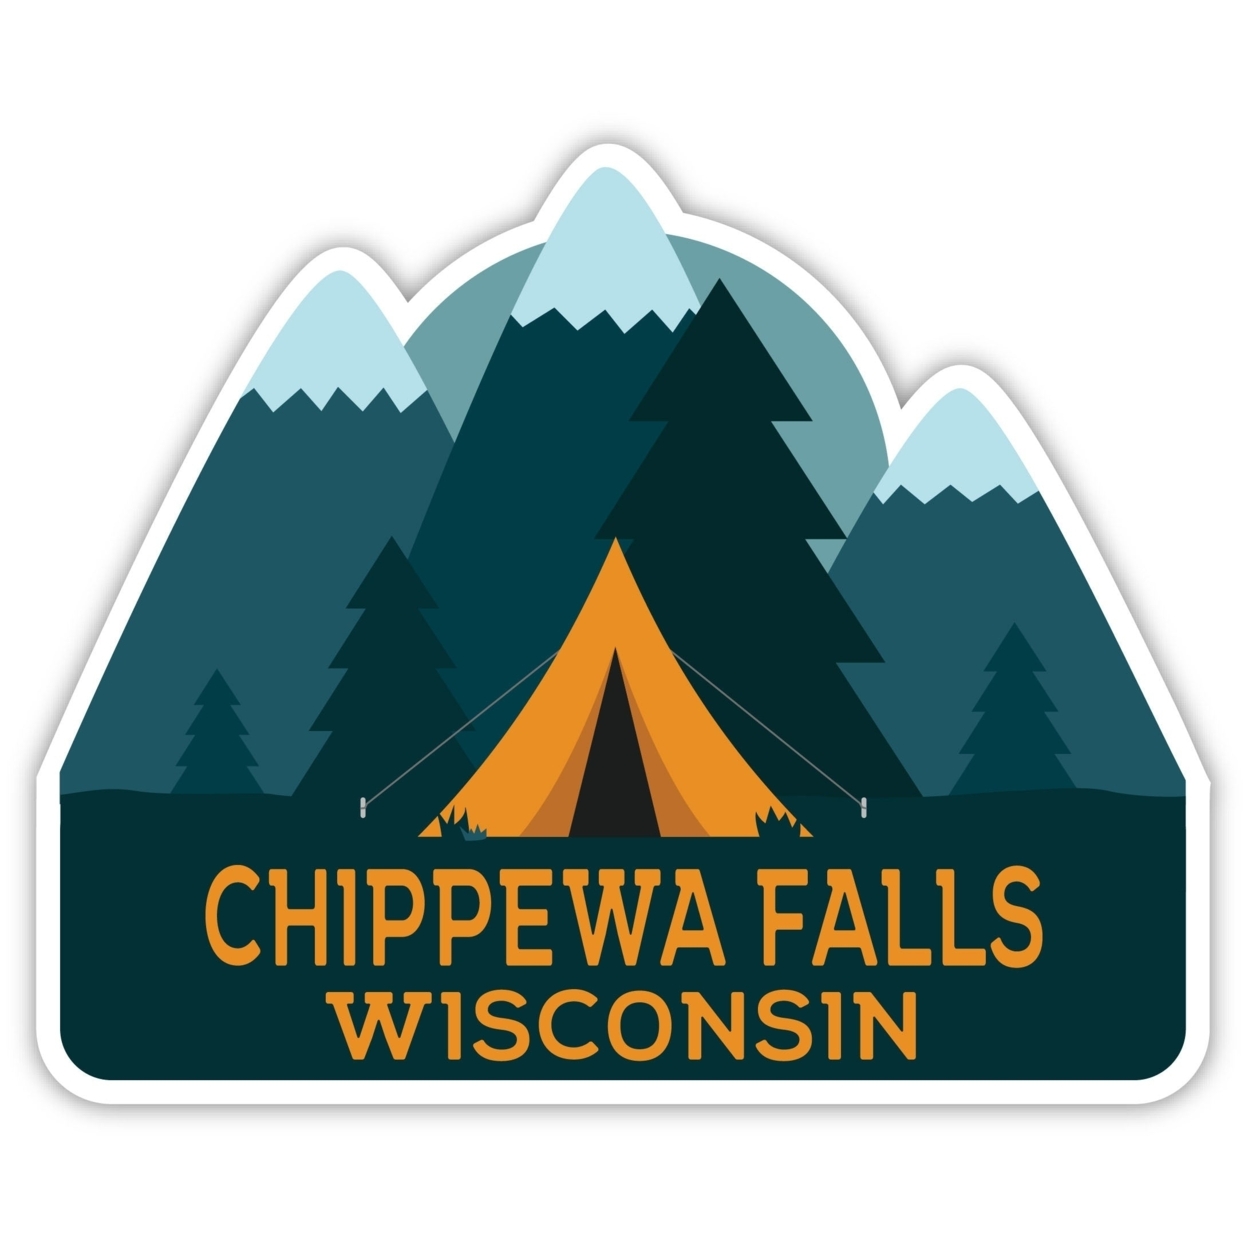 Chippewa Falls Wisconsin Souvenir Decorative Stickers (Choose Theme And Size) - 4-Pack, 4-Inch, Tent